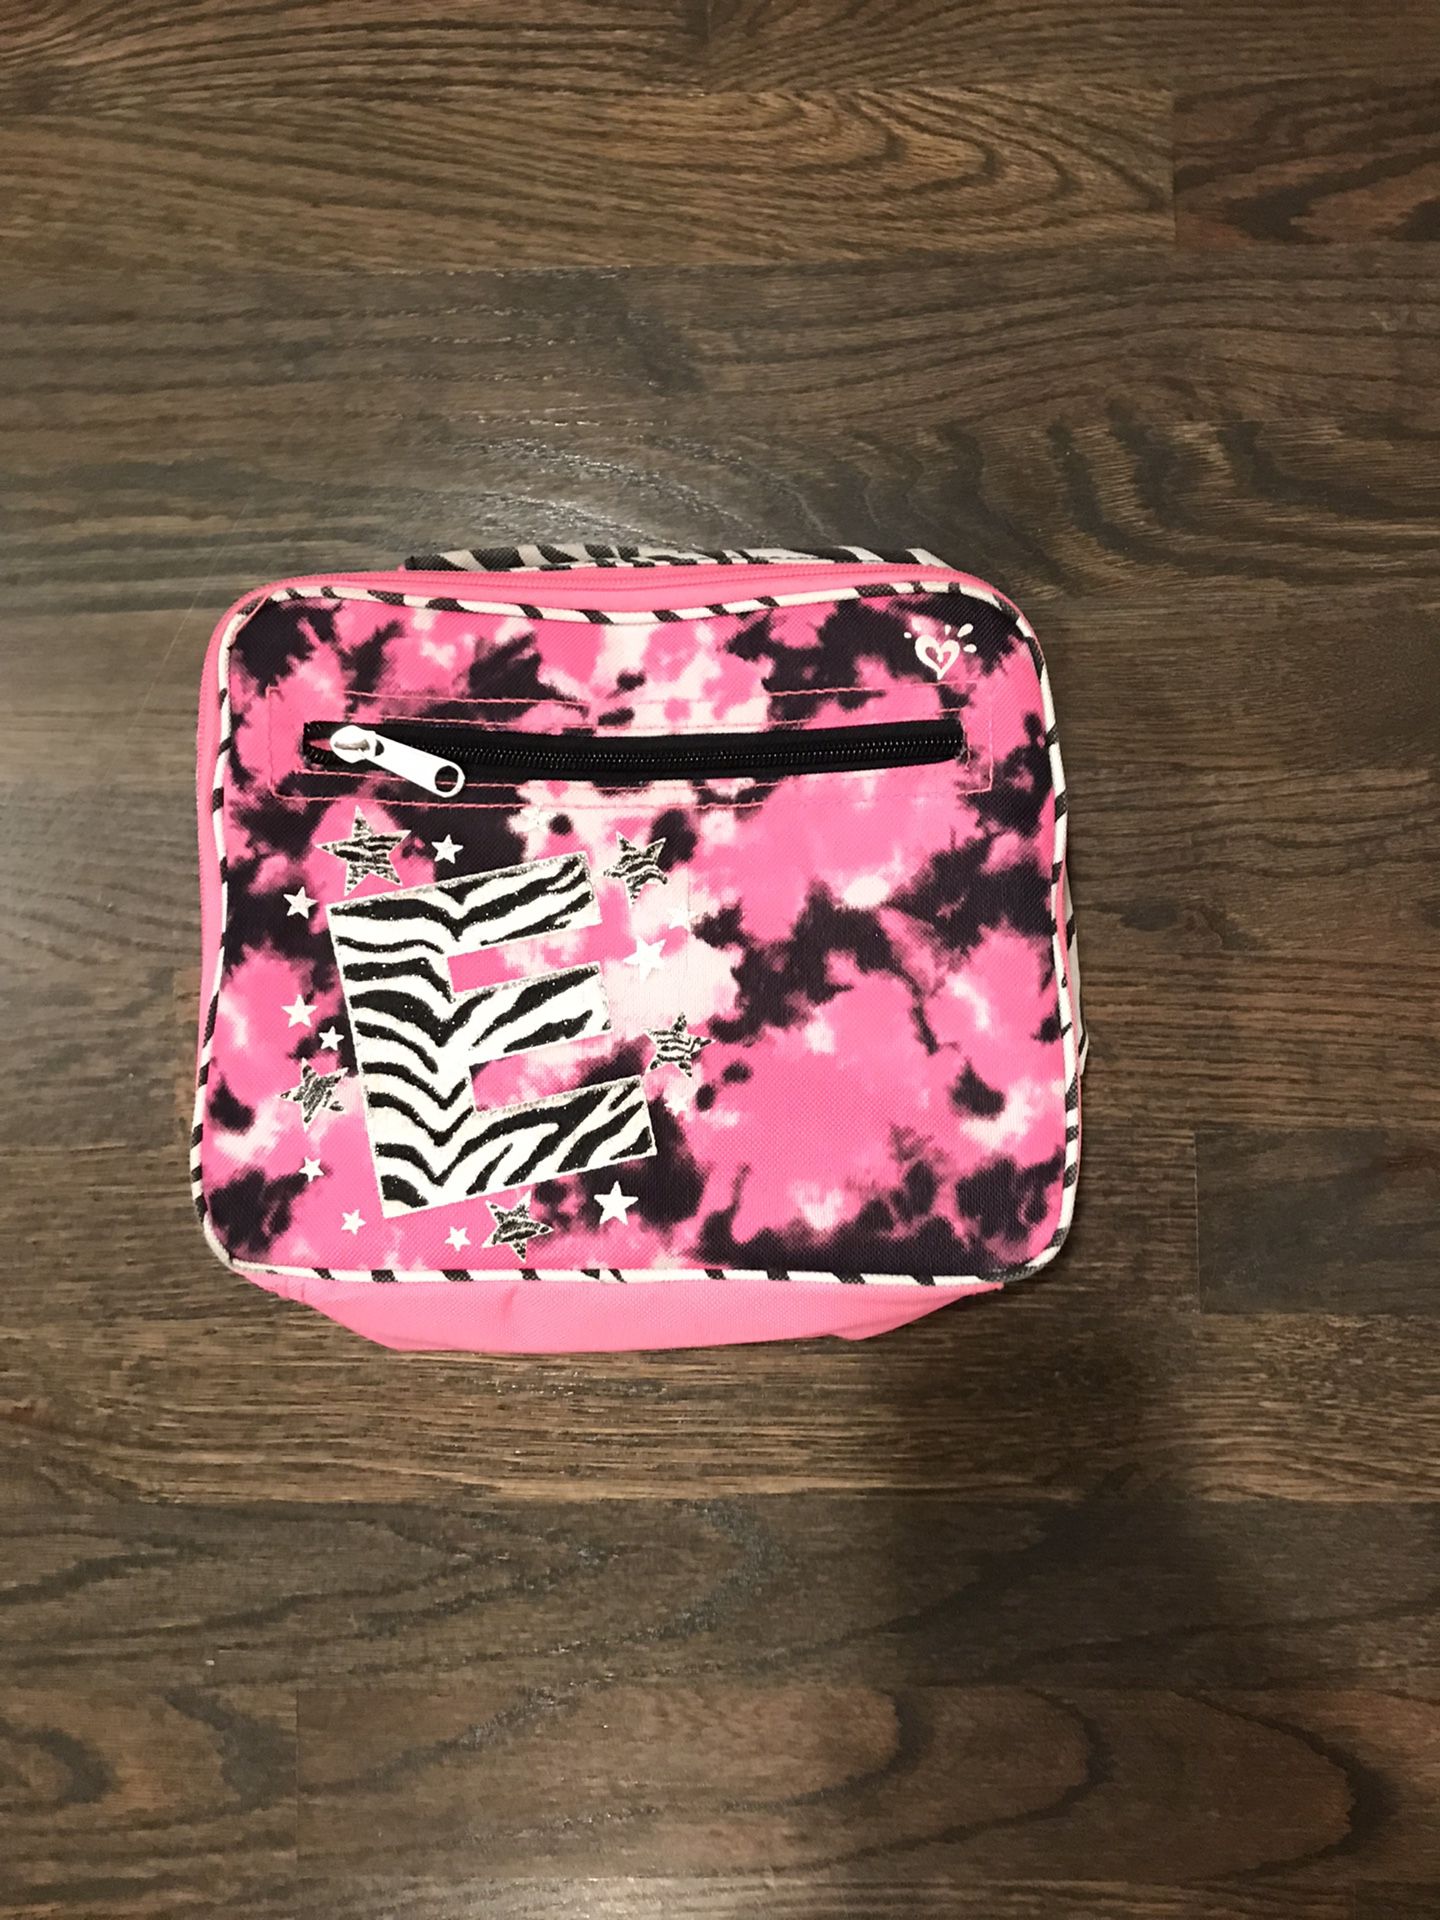  Zebra Themed Pink Kids Girls Clean Small Lunch Box E Letter With Heart